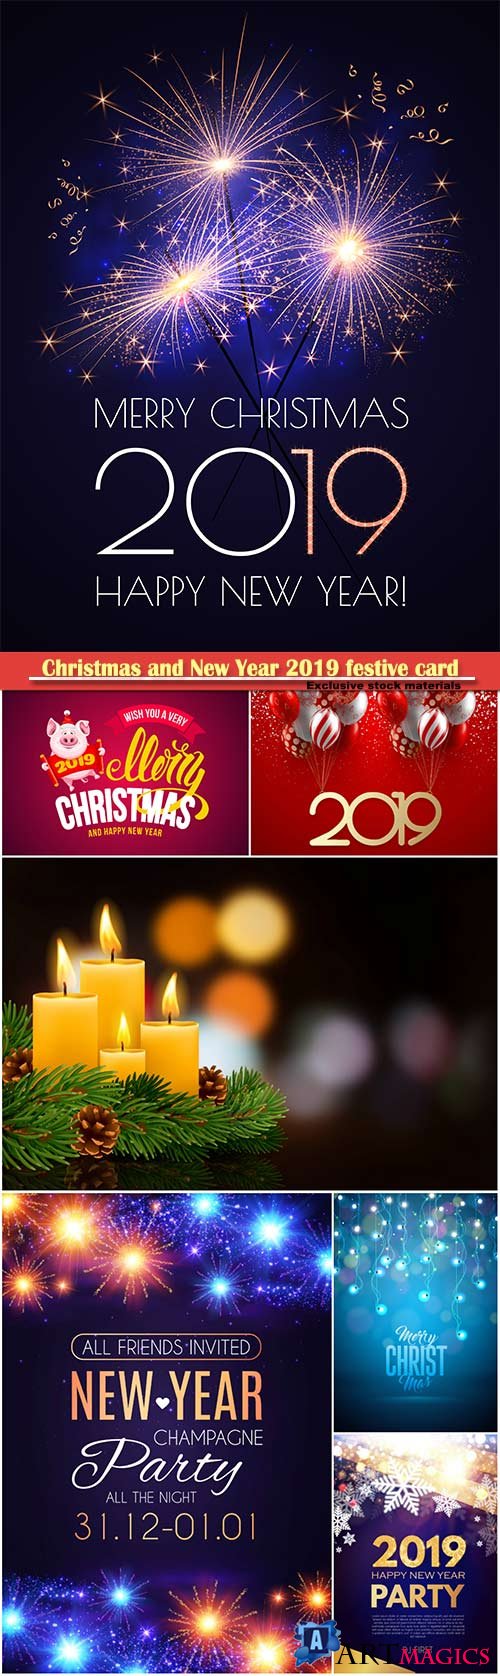 Christmas and New Year 2019 festive card